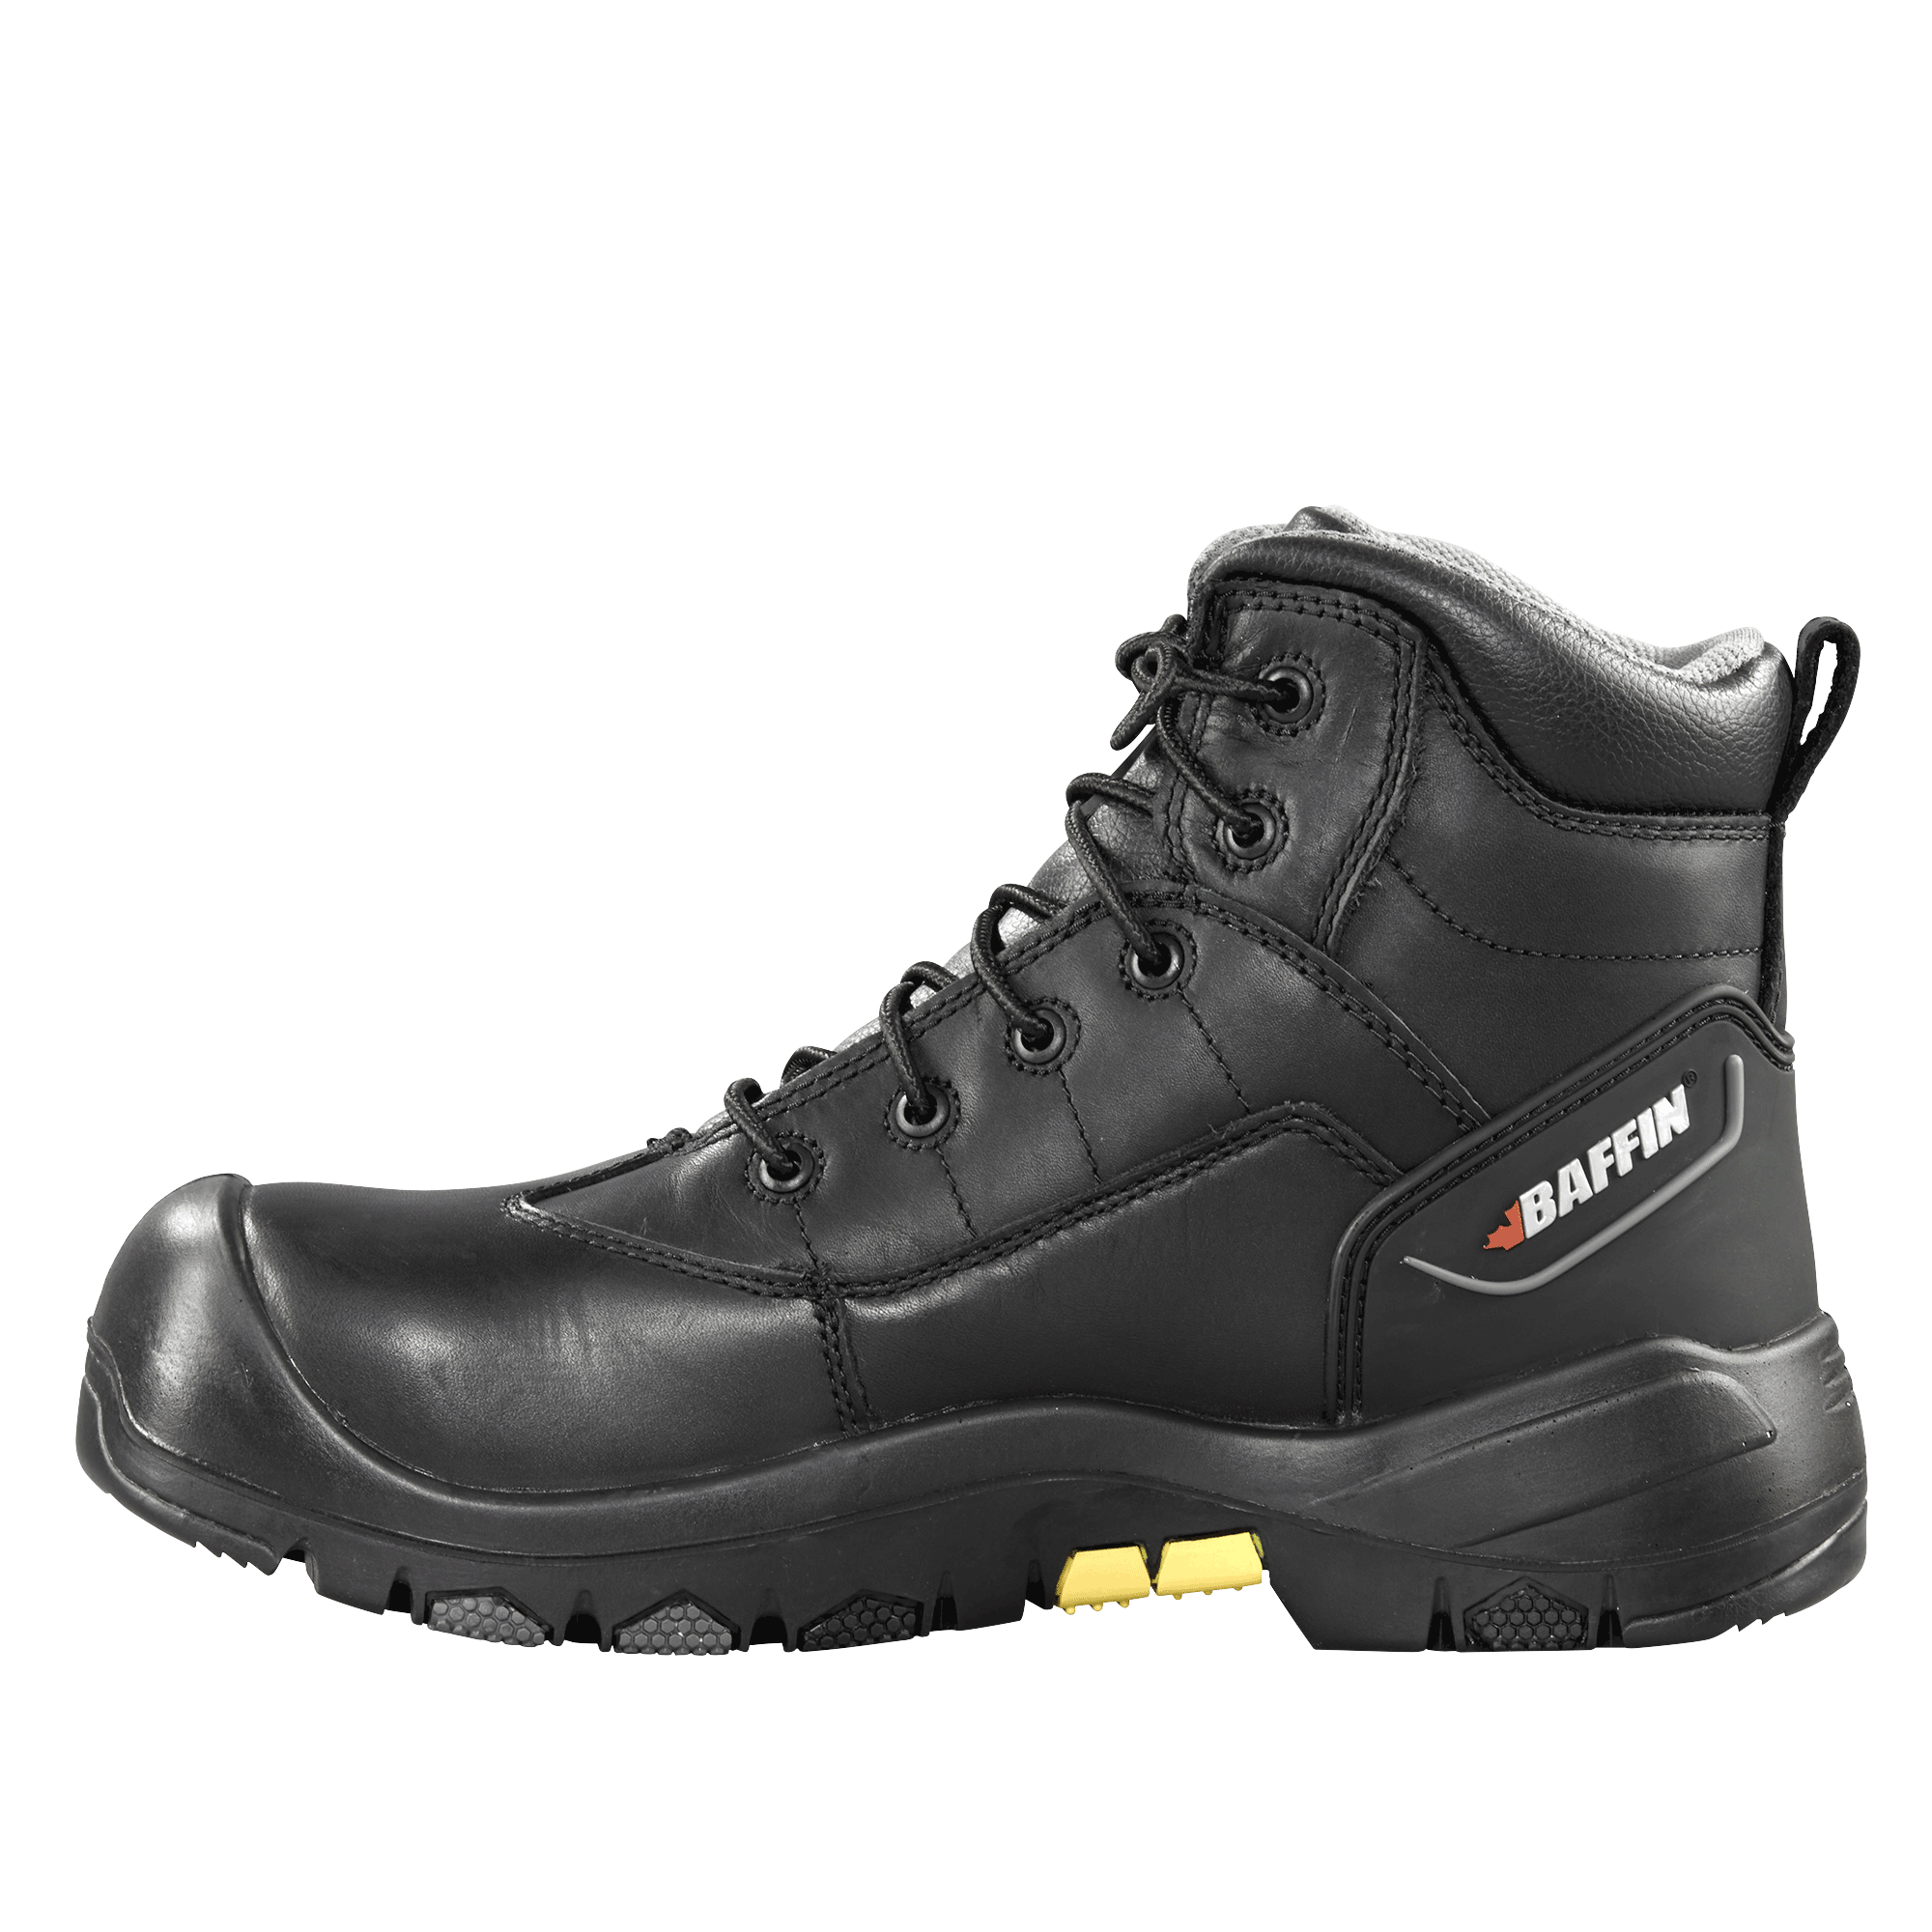 CHAOS (Safety Toe & Plate) | Men's Boot